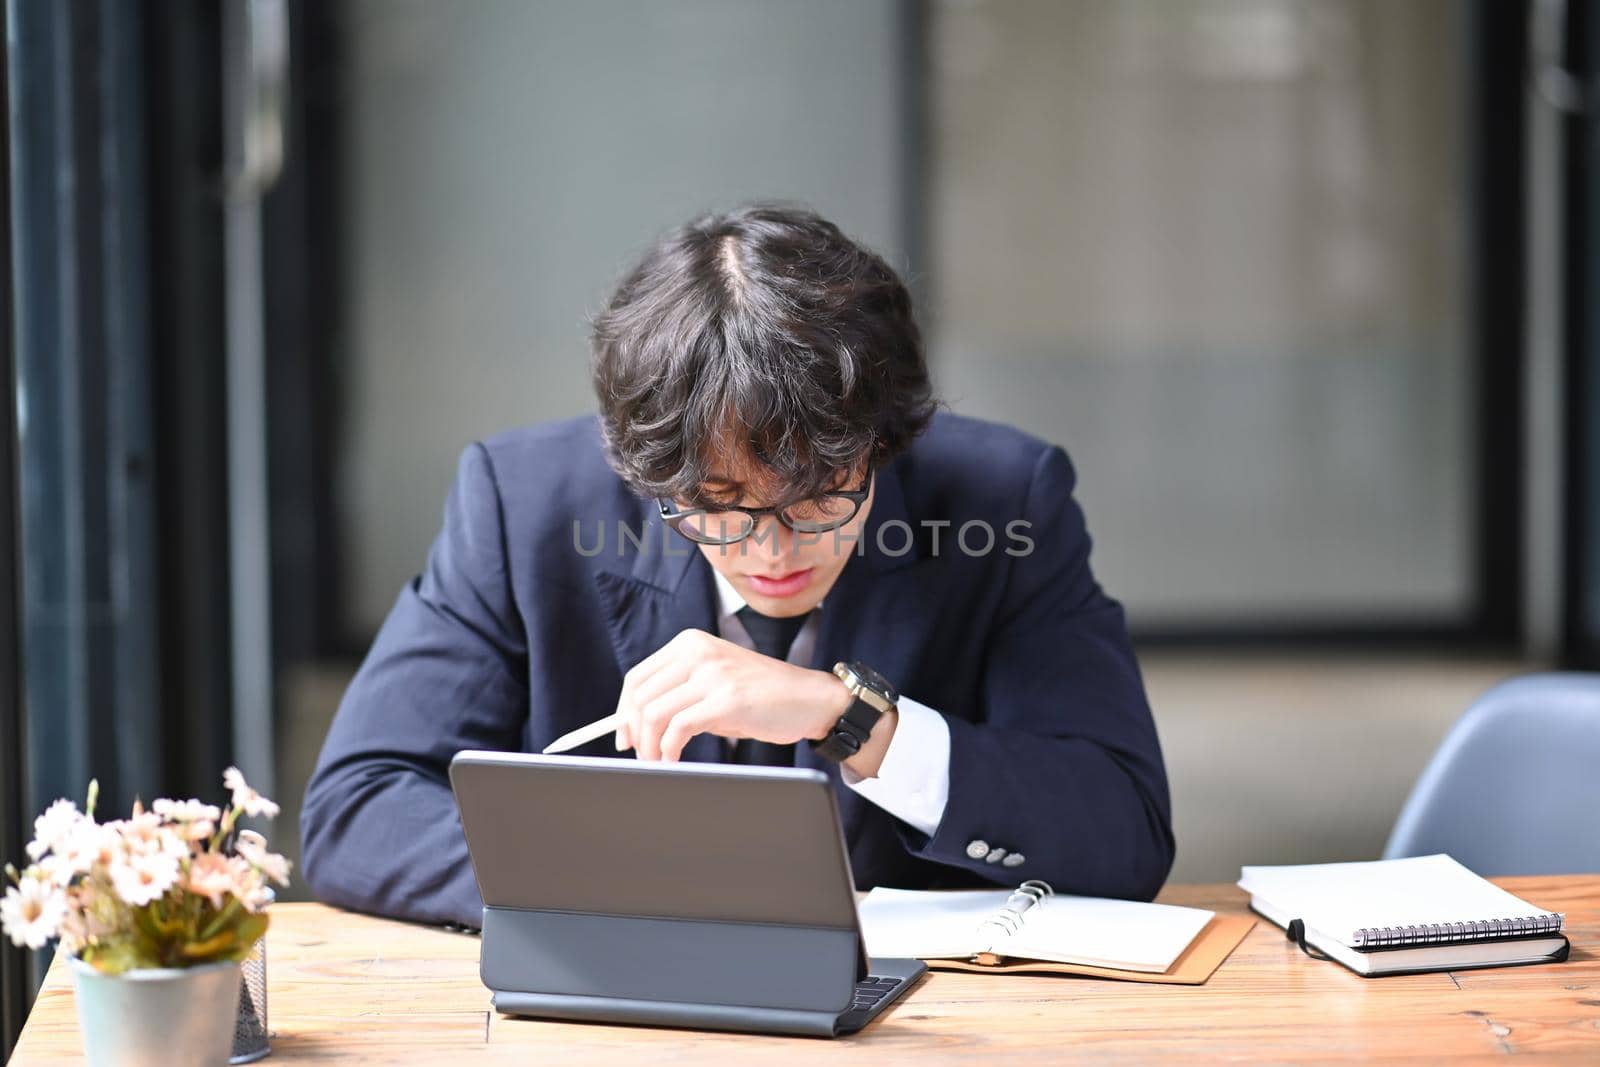 Young businessman working with computer tablet in bright office. by prathanchorruangsak